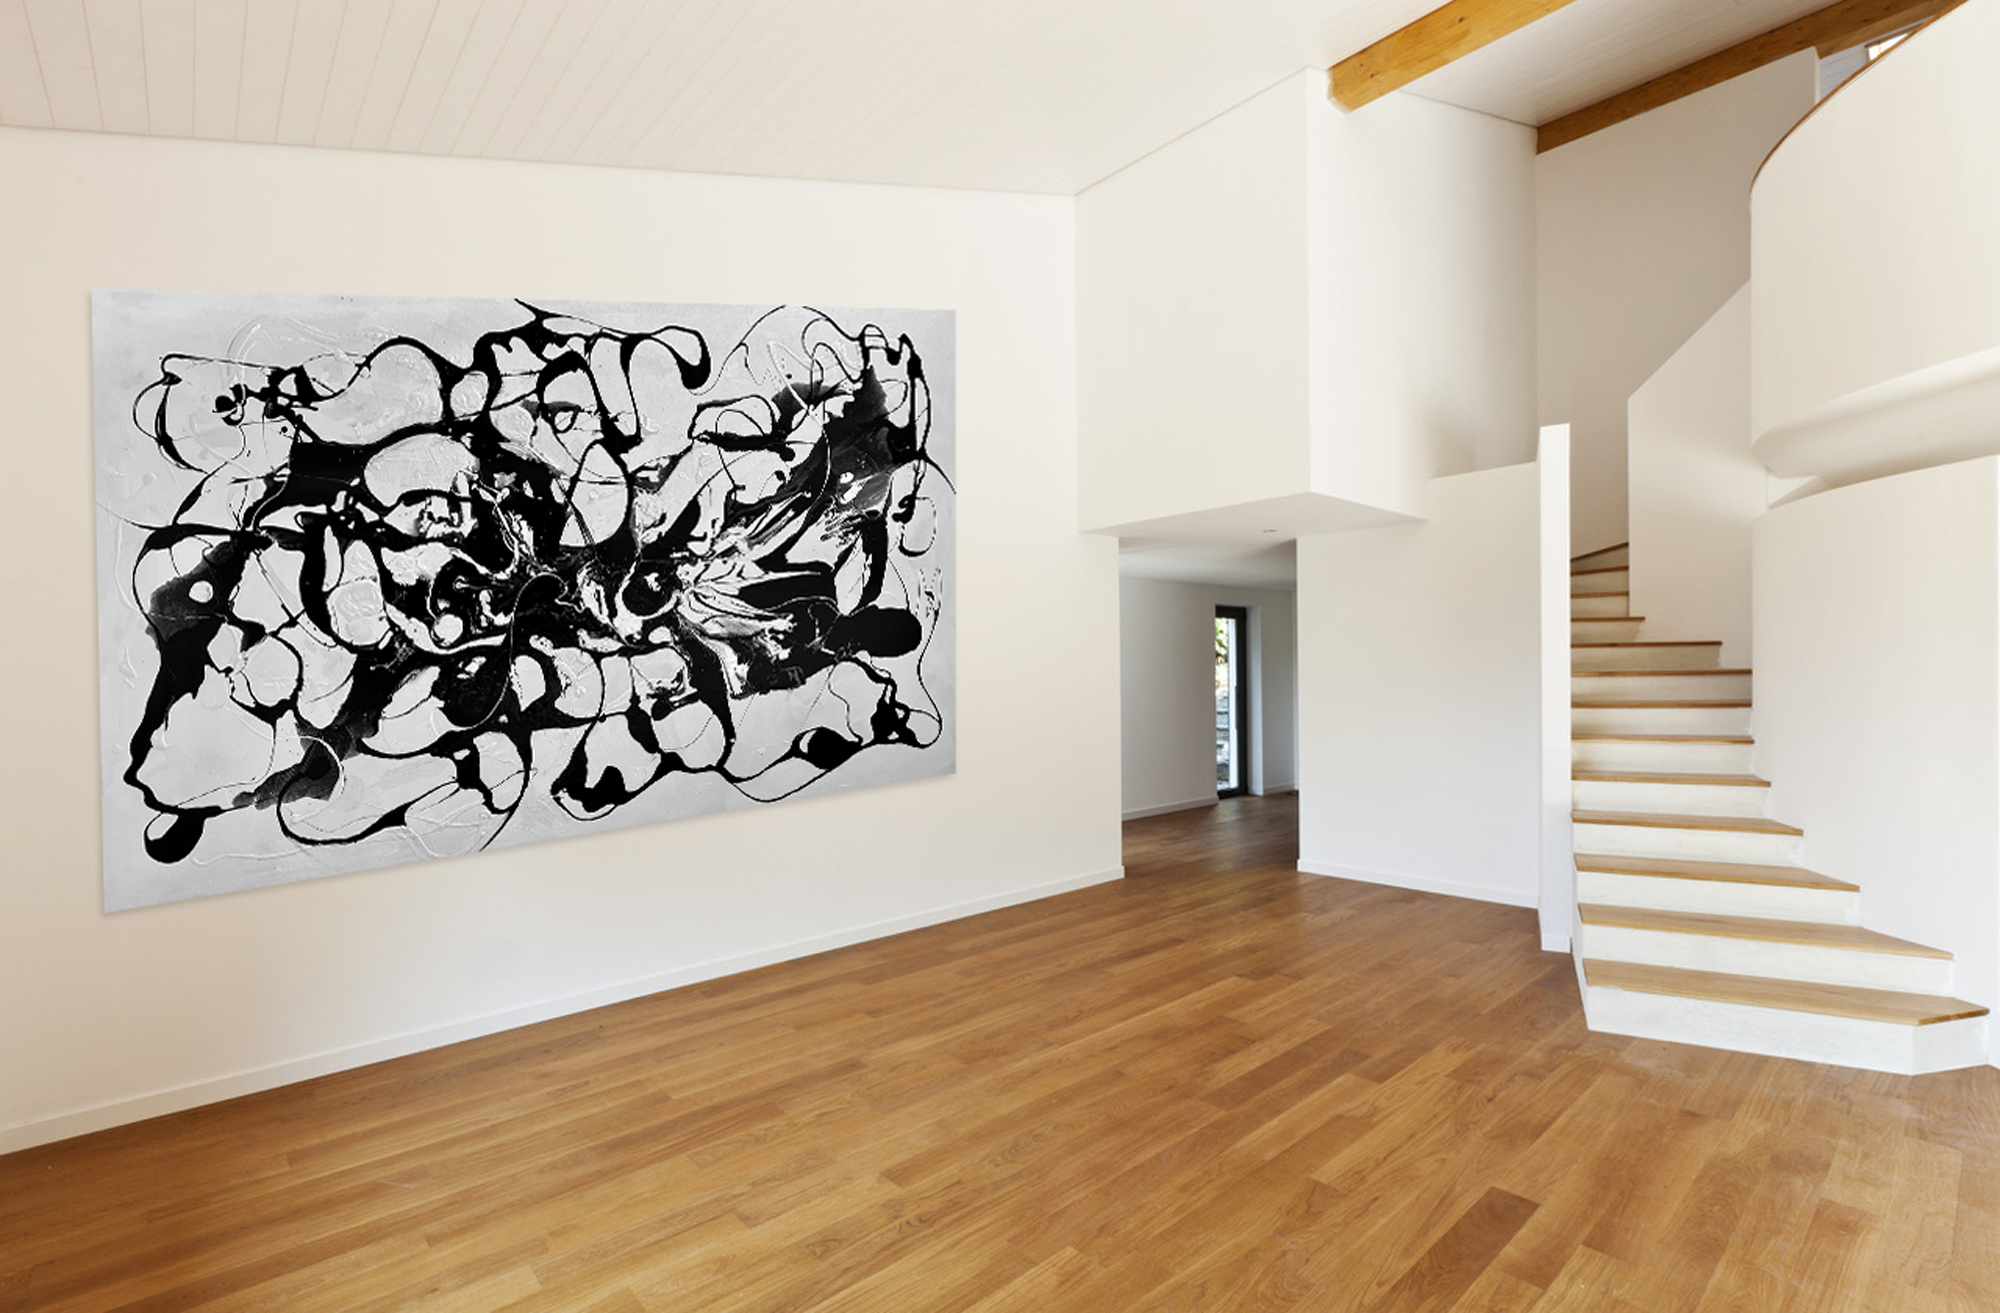 Large contemporary wall art in modern home. The painting is black and white creating space and minimalist.